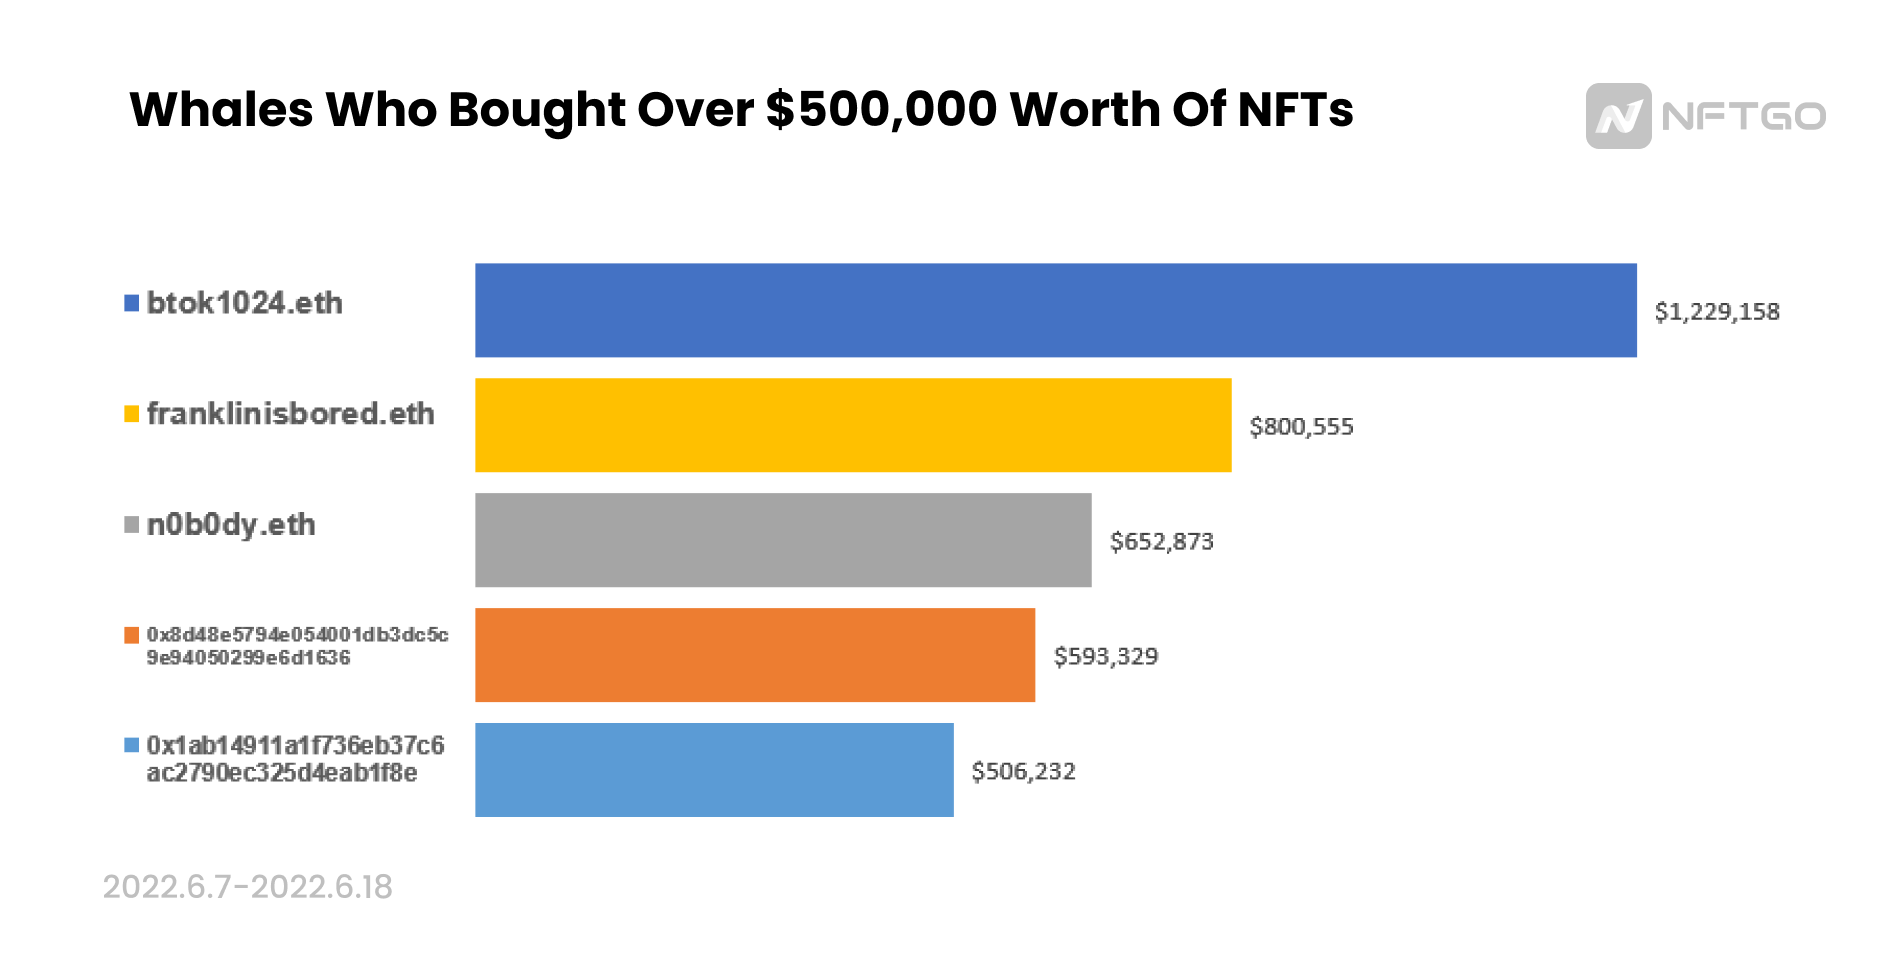 Whales Who Bought Over $500,000 Worth of NFTs (Source: NFTGo.io)